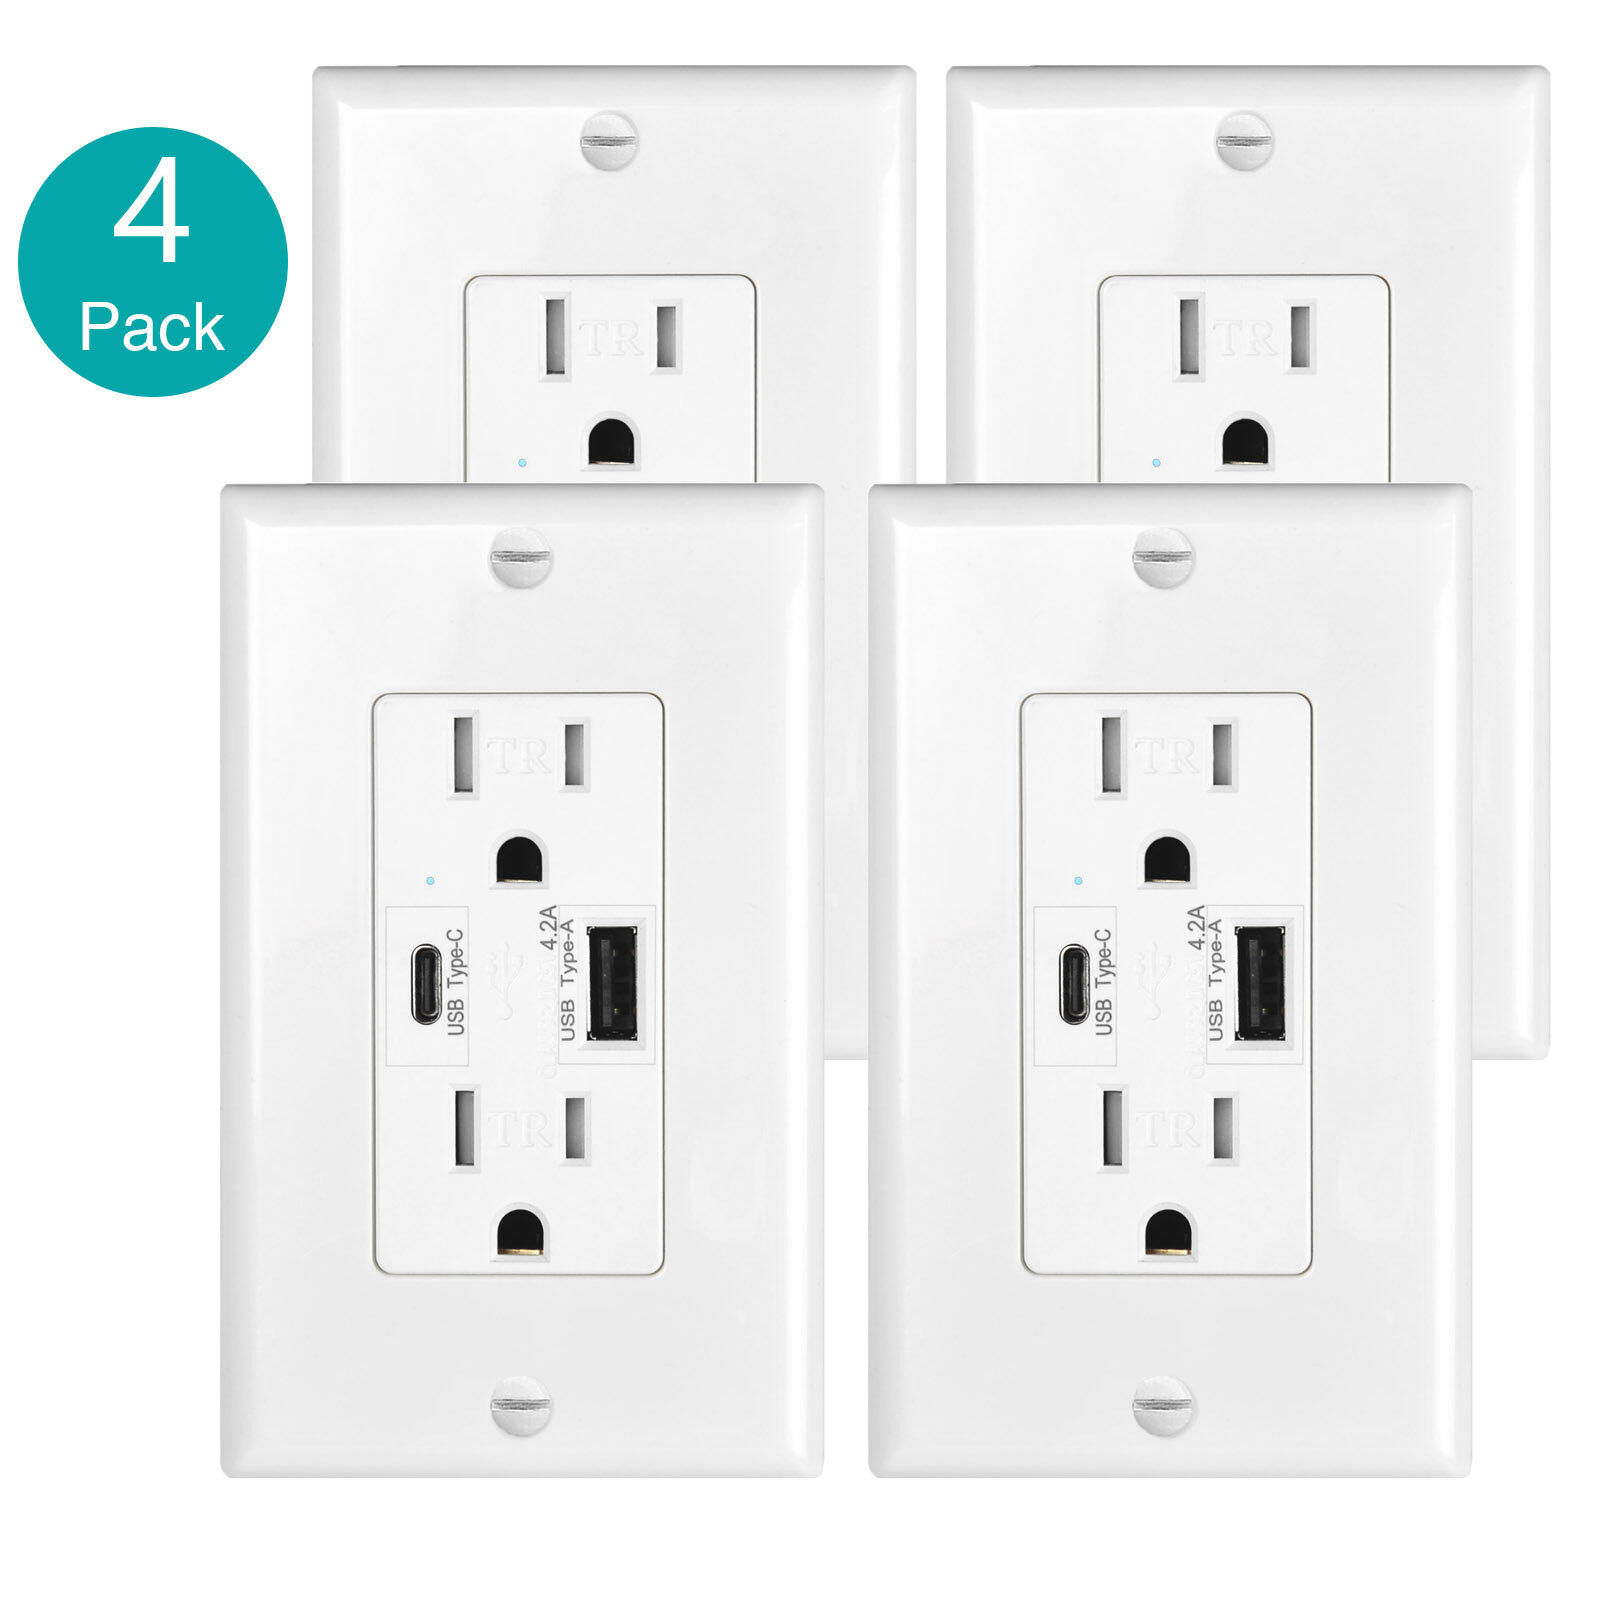 4.2A USB Wall Socket Outlet AC Power Receptacle Type-C Fast Charger Plug 15A 4PK